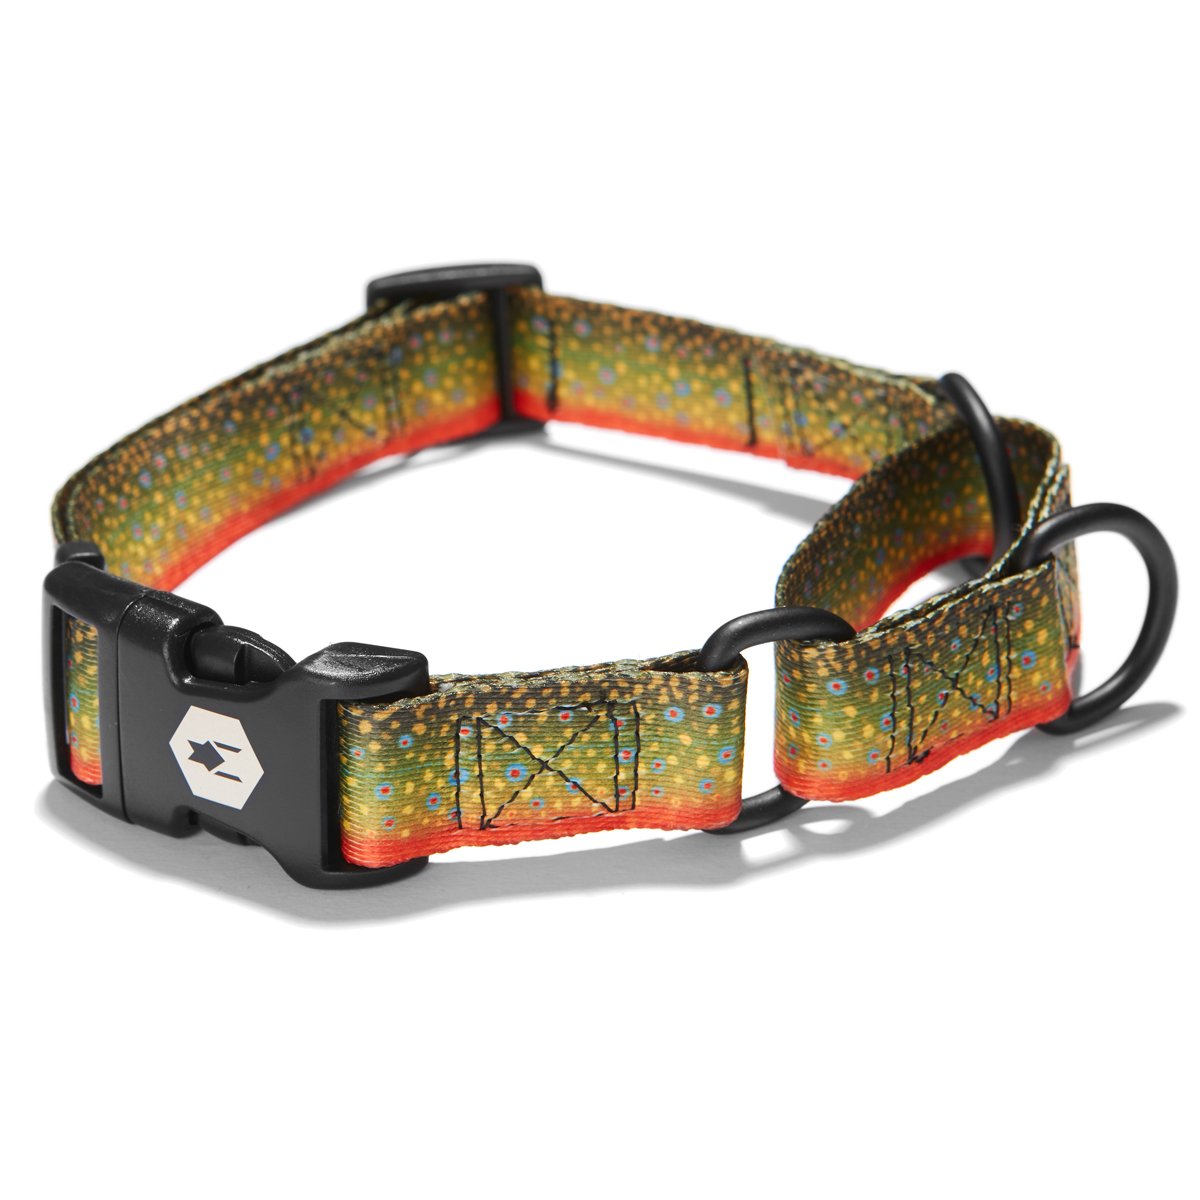 BrookTrout MARTINGALE DOG COLLAR Made in the USA by Wolfgang Man & Beast